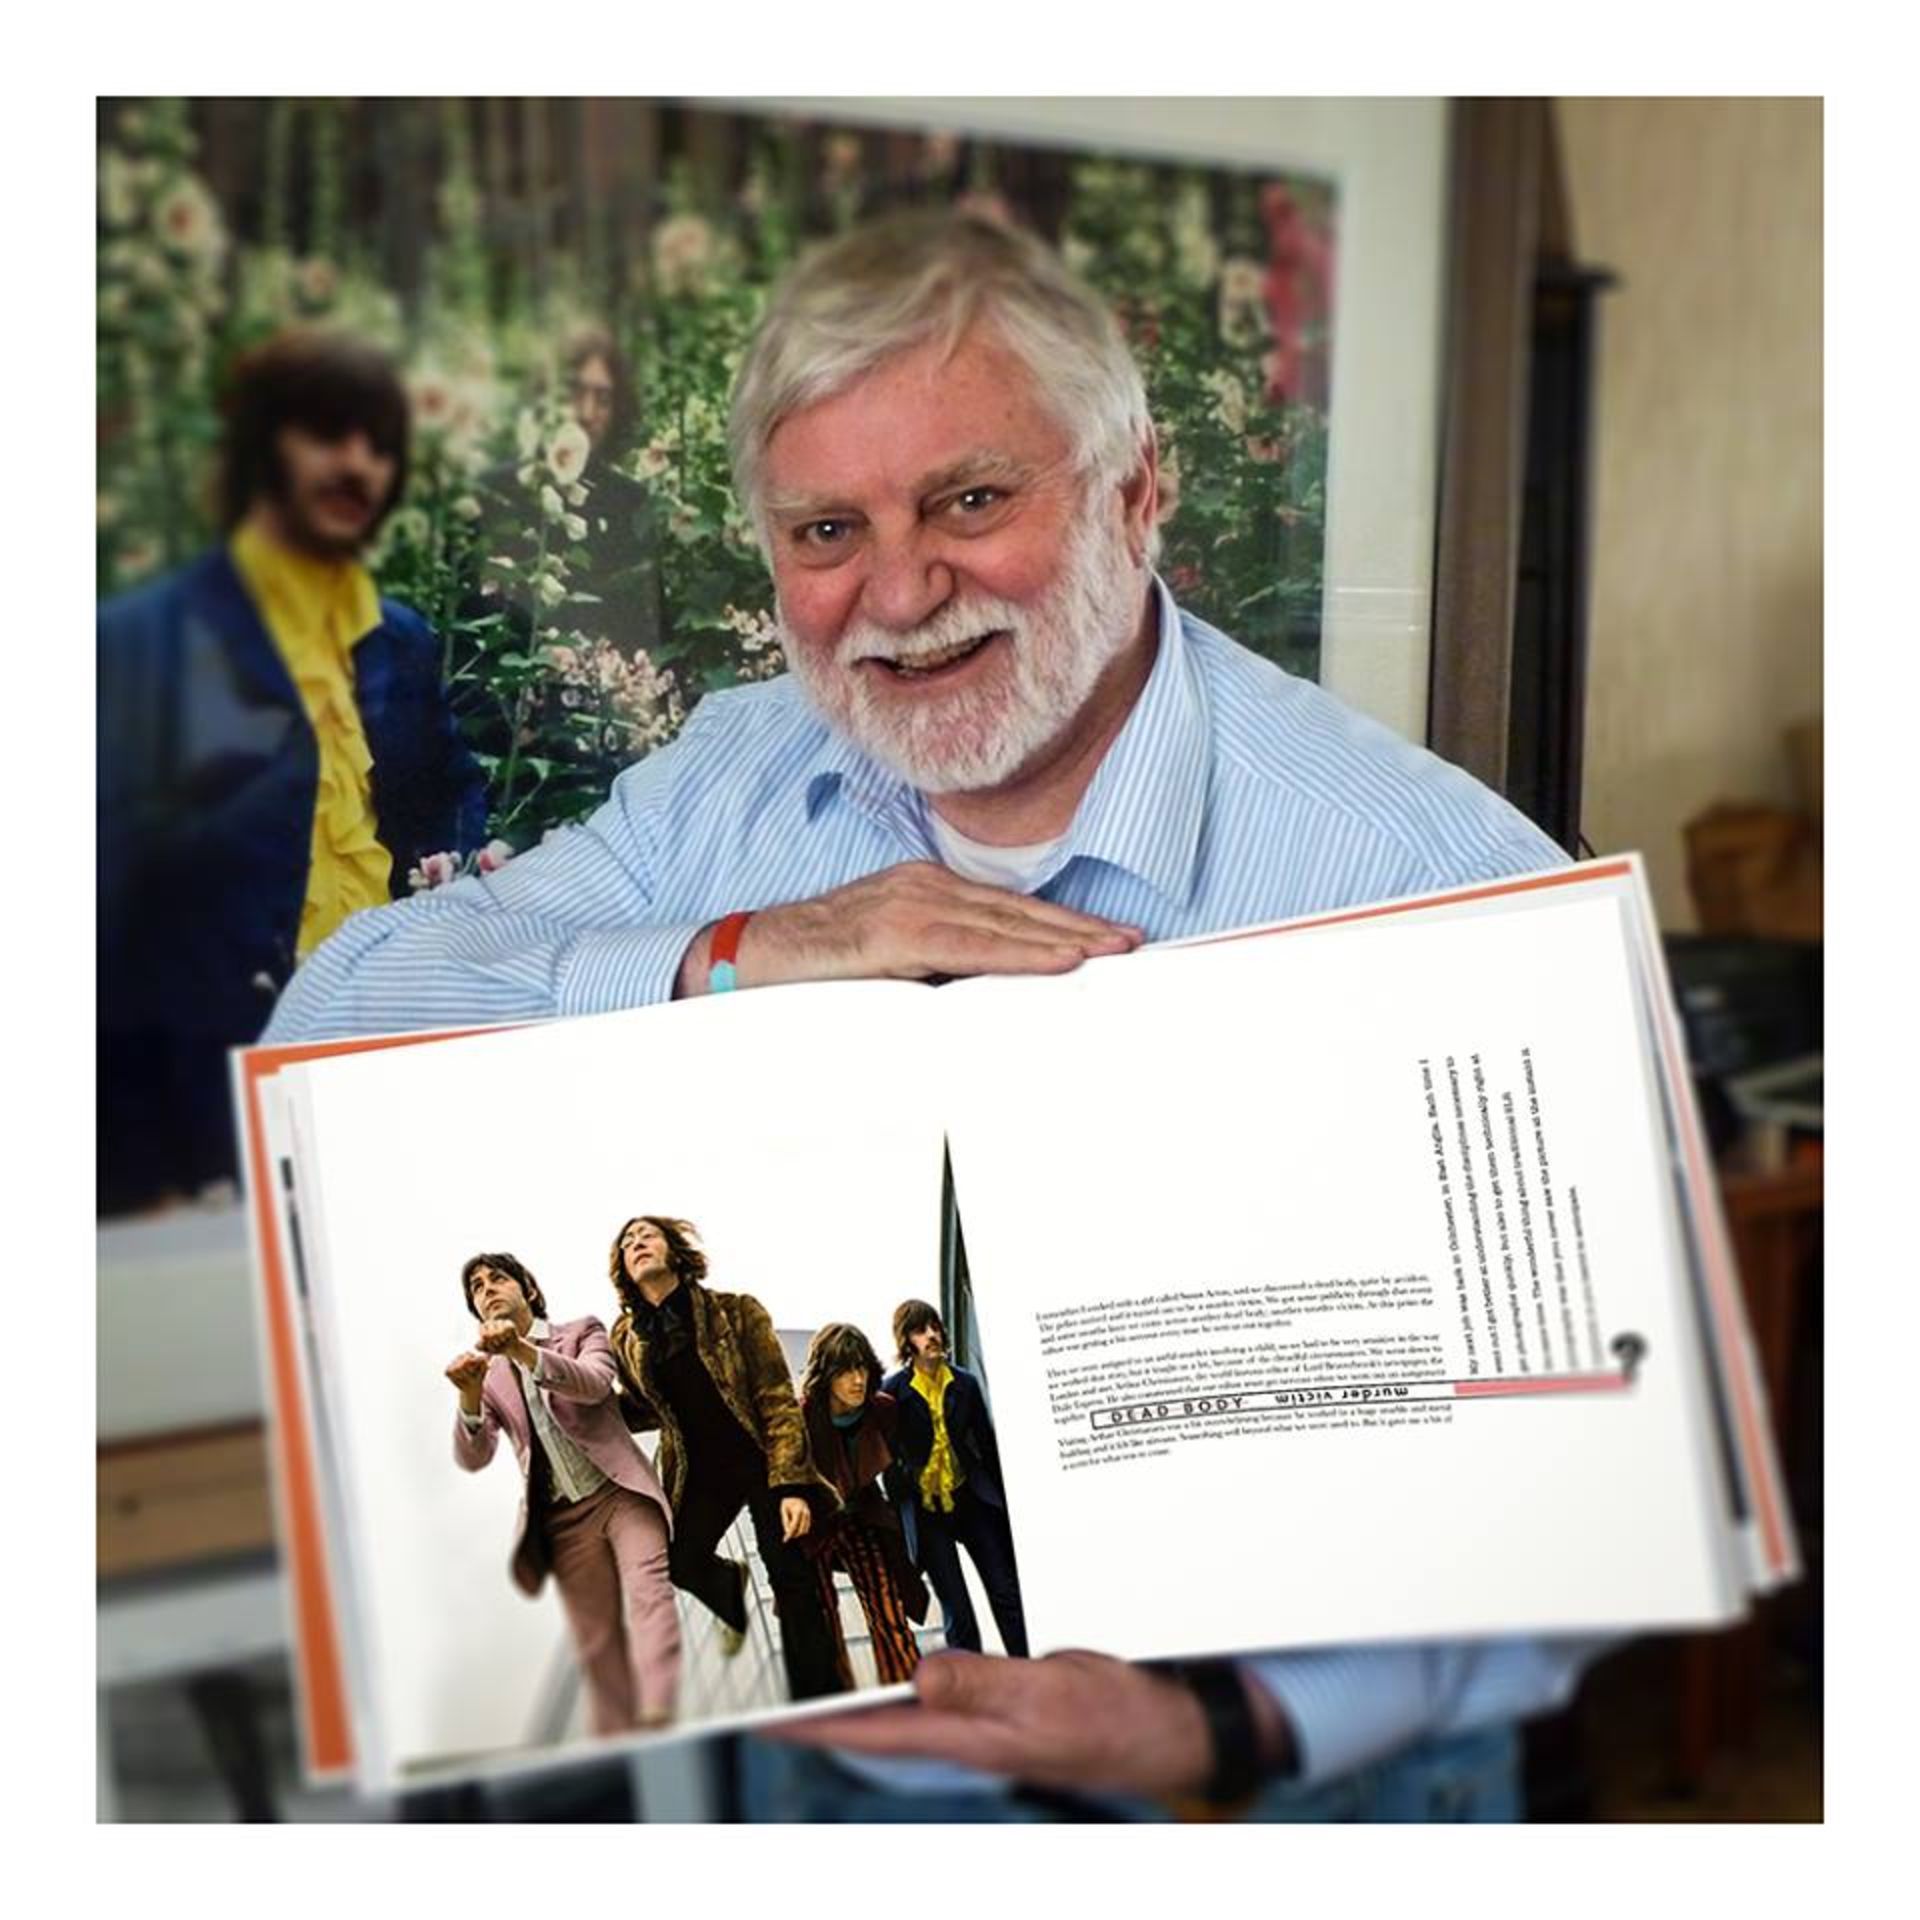 Beatles Photo and Limited Edition Book by renowned photographer Tom Murray - Image 2 of 2